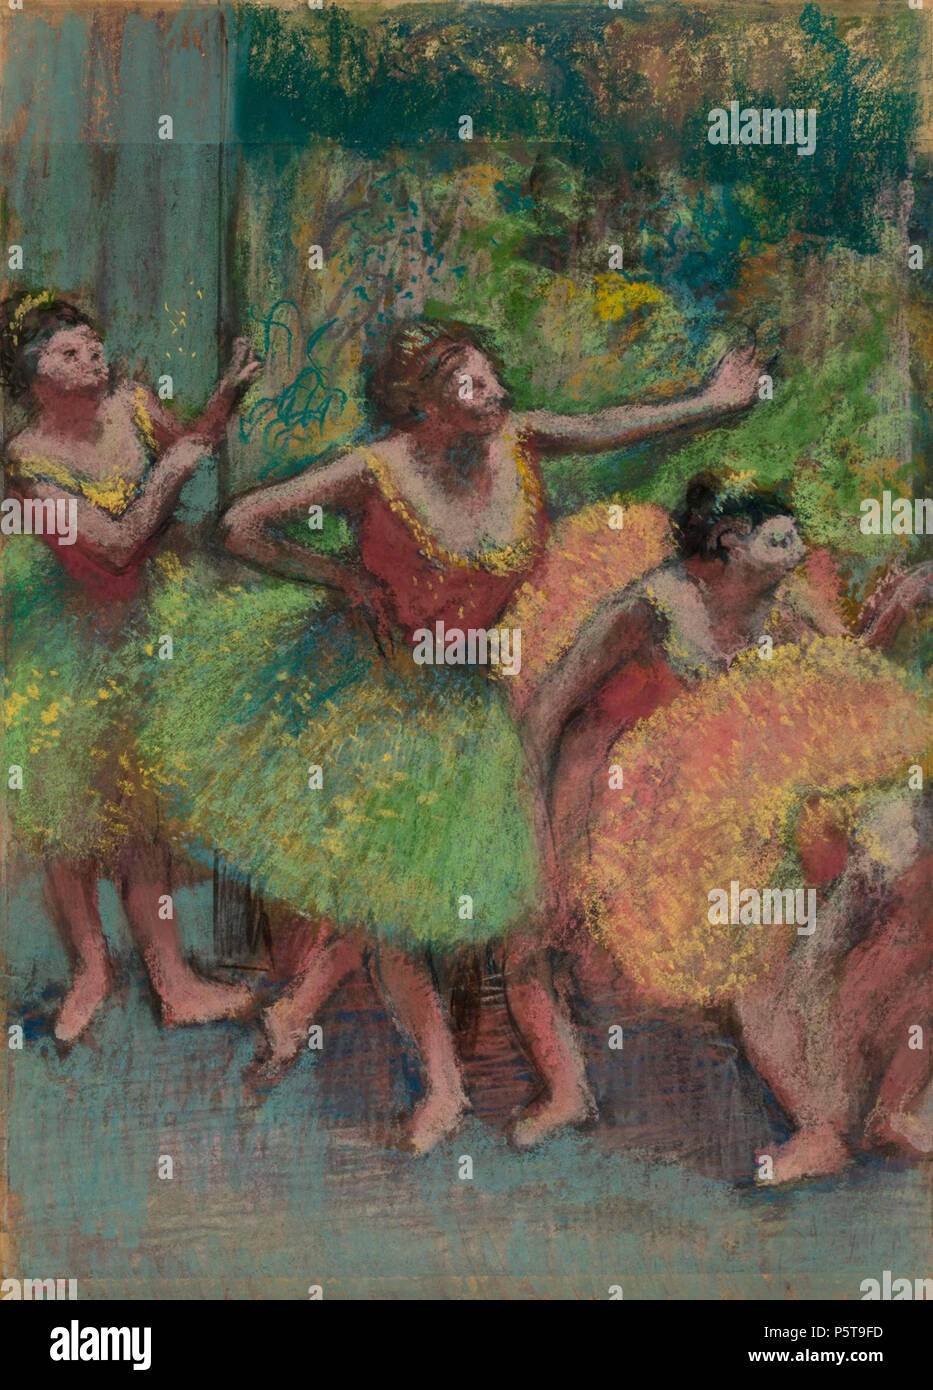 N/A. English: Dancers in Green and Yellow by Edgar Degas, c. 1903, pastel and charcoal on three pieces of tracing paper, mounted to paperboard, 38 7/8 x 28 1/8 inches (98.8 x 71.5 cm), Solomon R. Guggenheim Museum . circa 1903. Edgar Degas 431 Dancers in Green and Yellow by Edgar Degas, c. 1903 Stock Photo